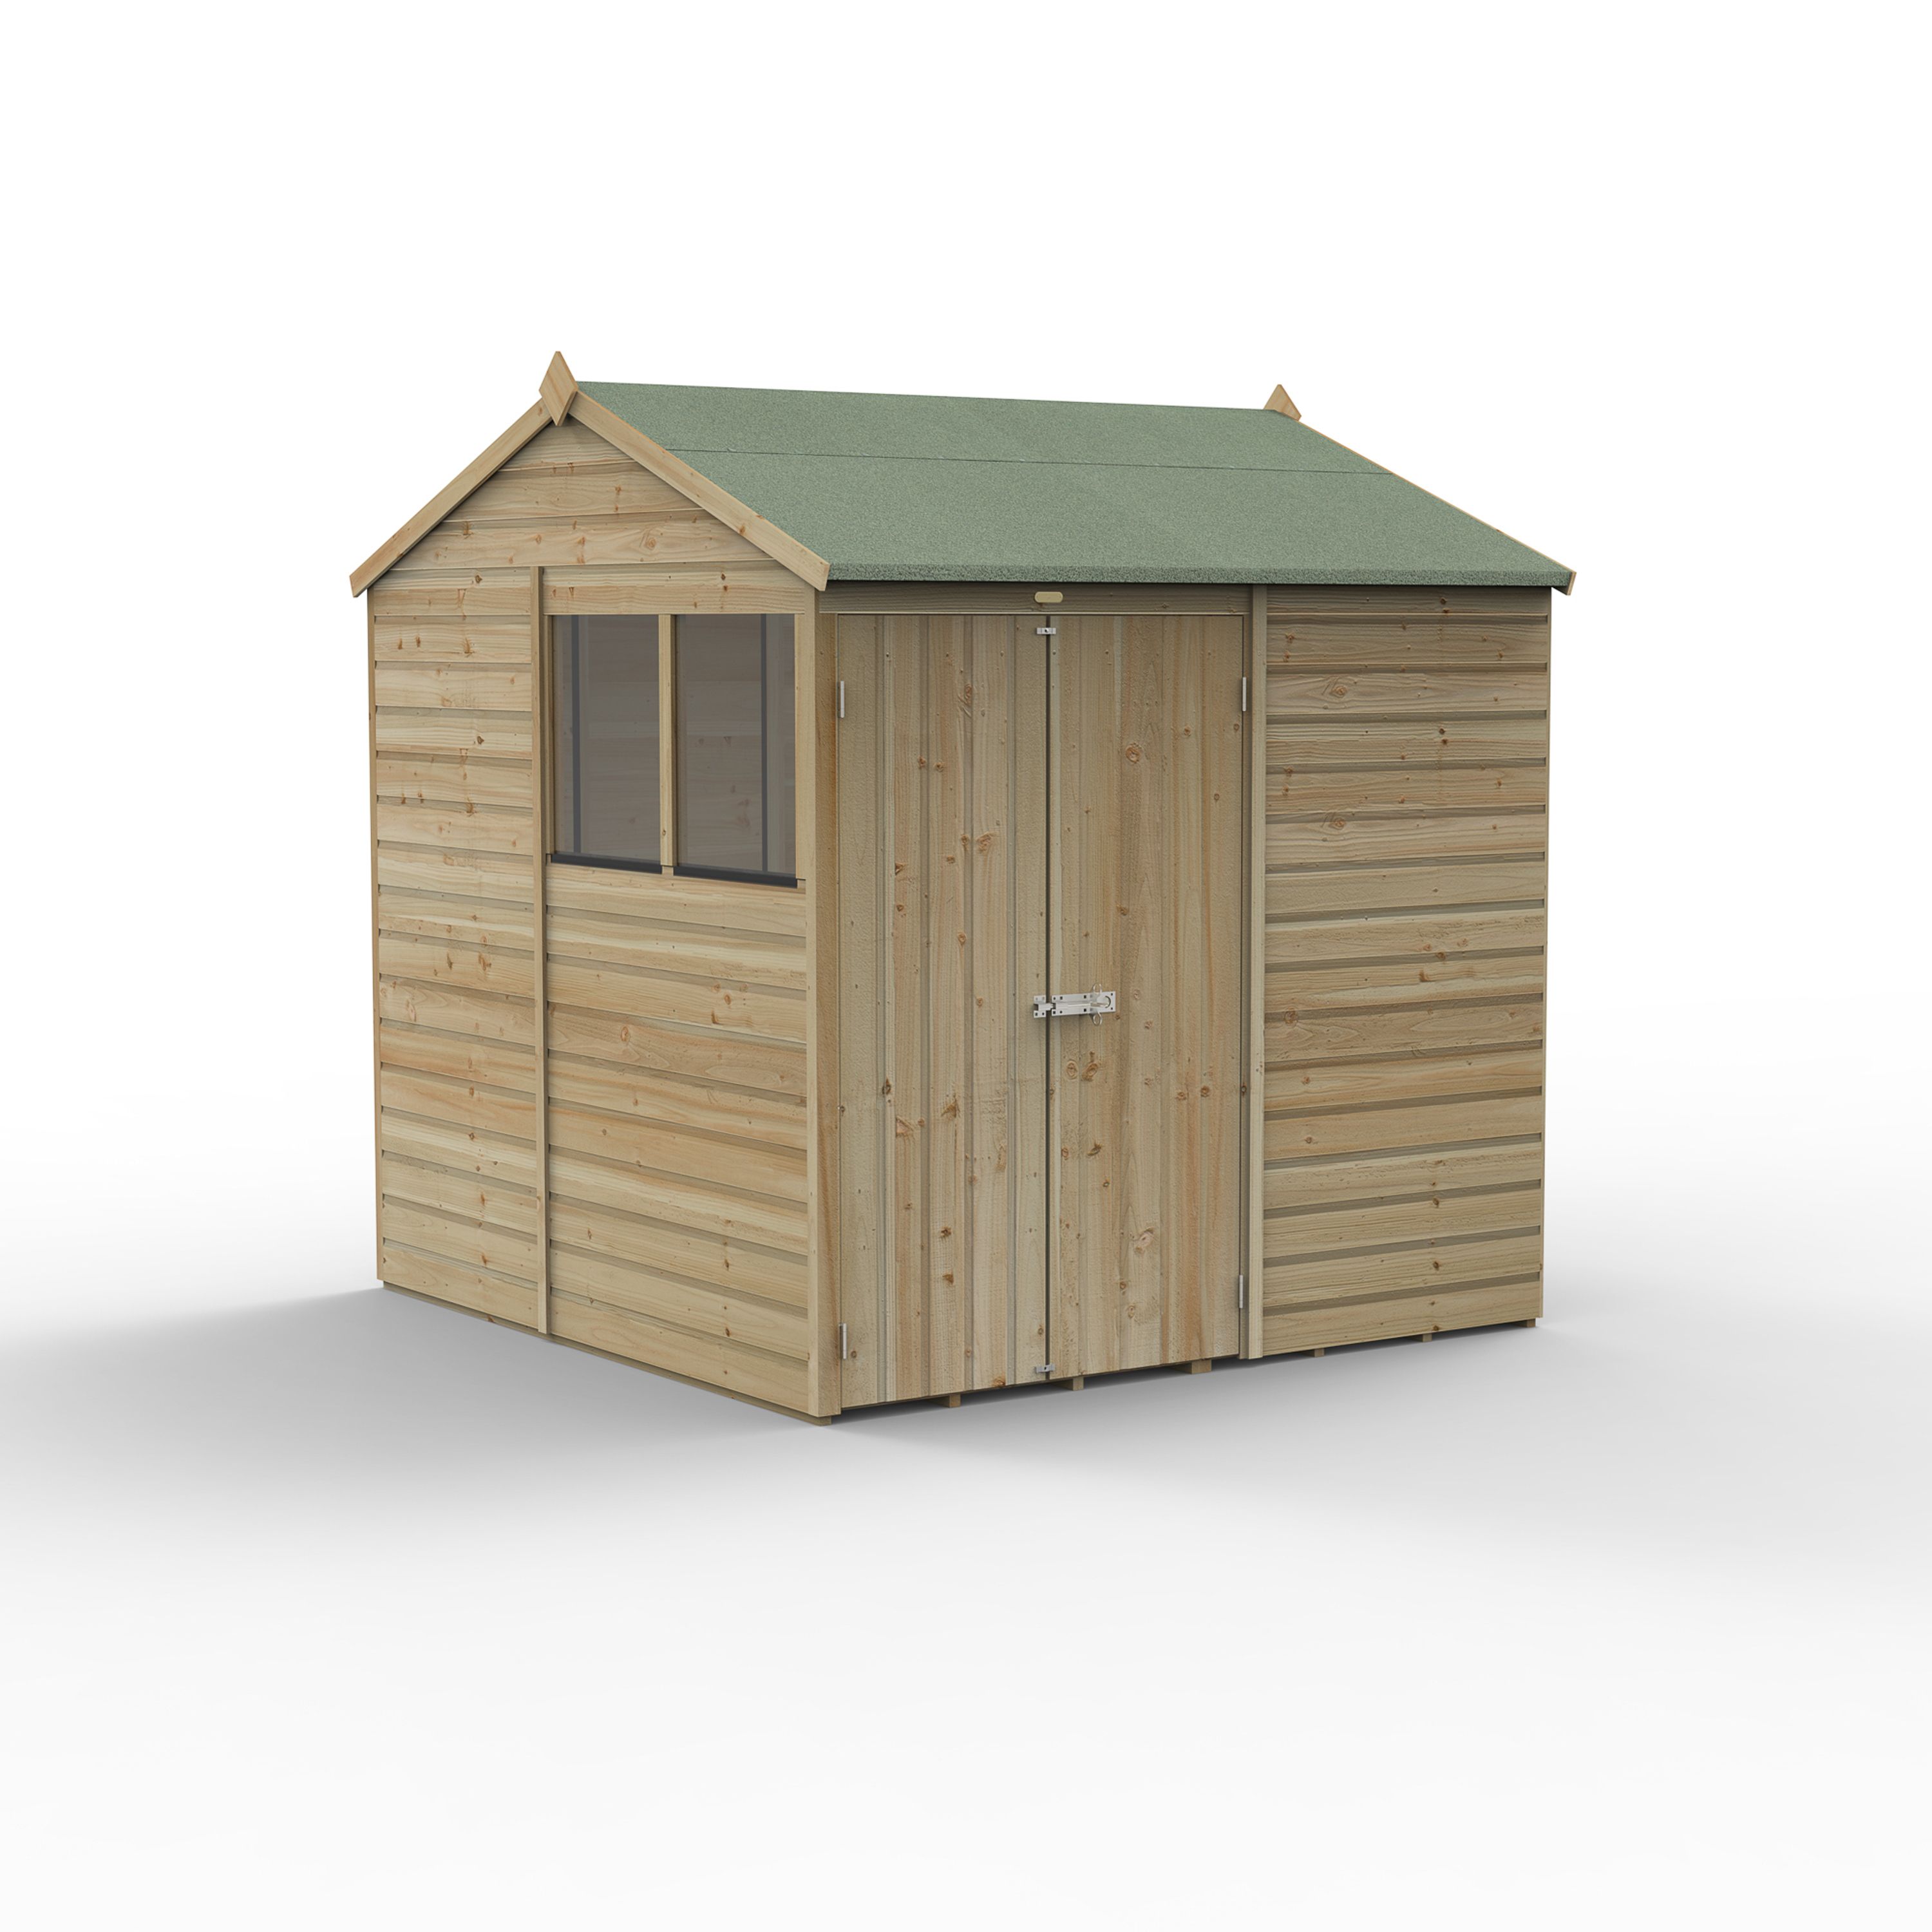 Forest Garden Beckwood 7x7 ft Reverse apex Natural timber Wooden 2 door Shed with floor & 2 windows - Assembly not required